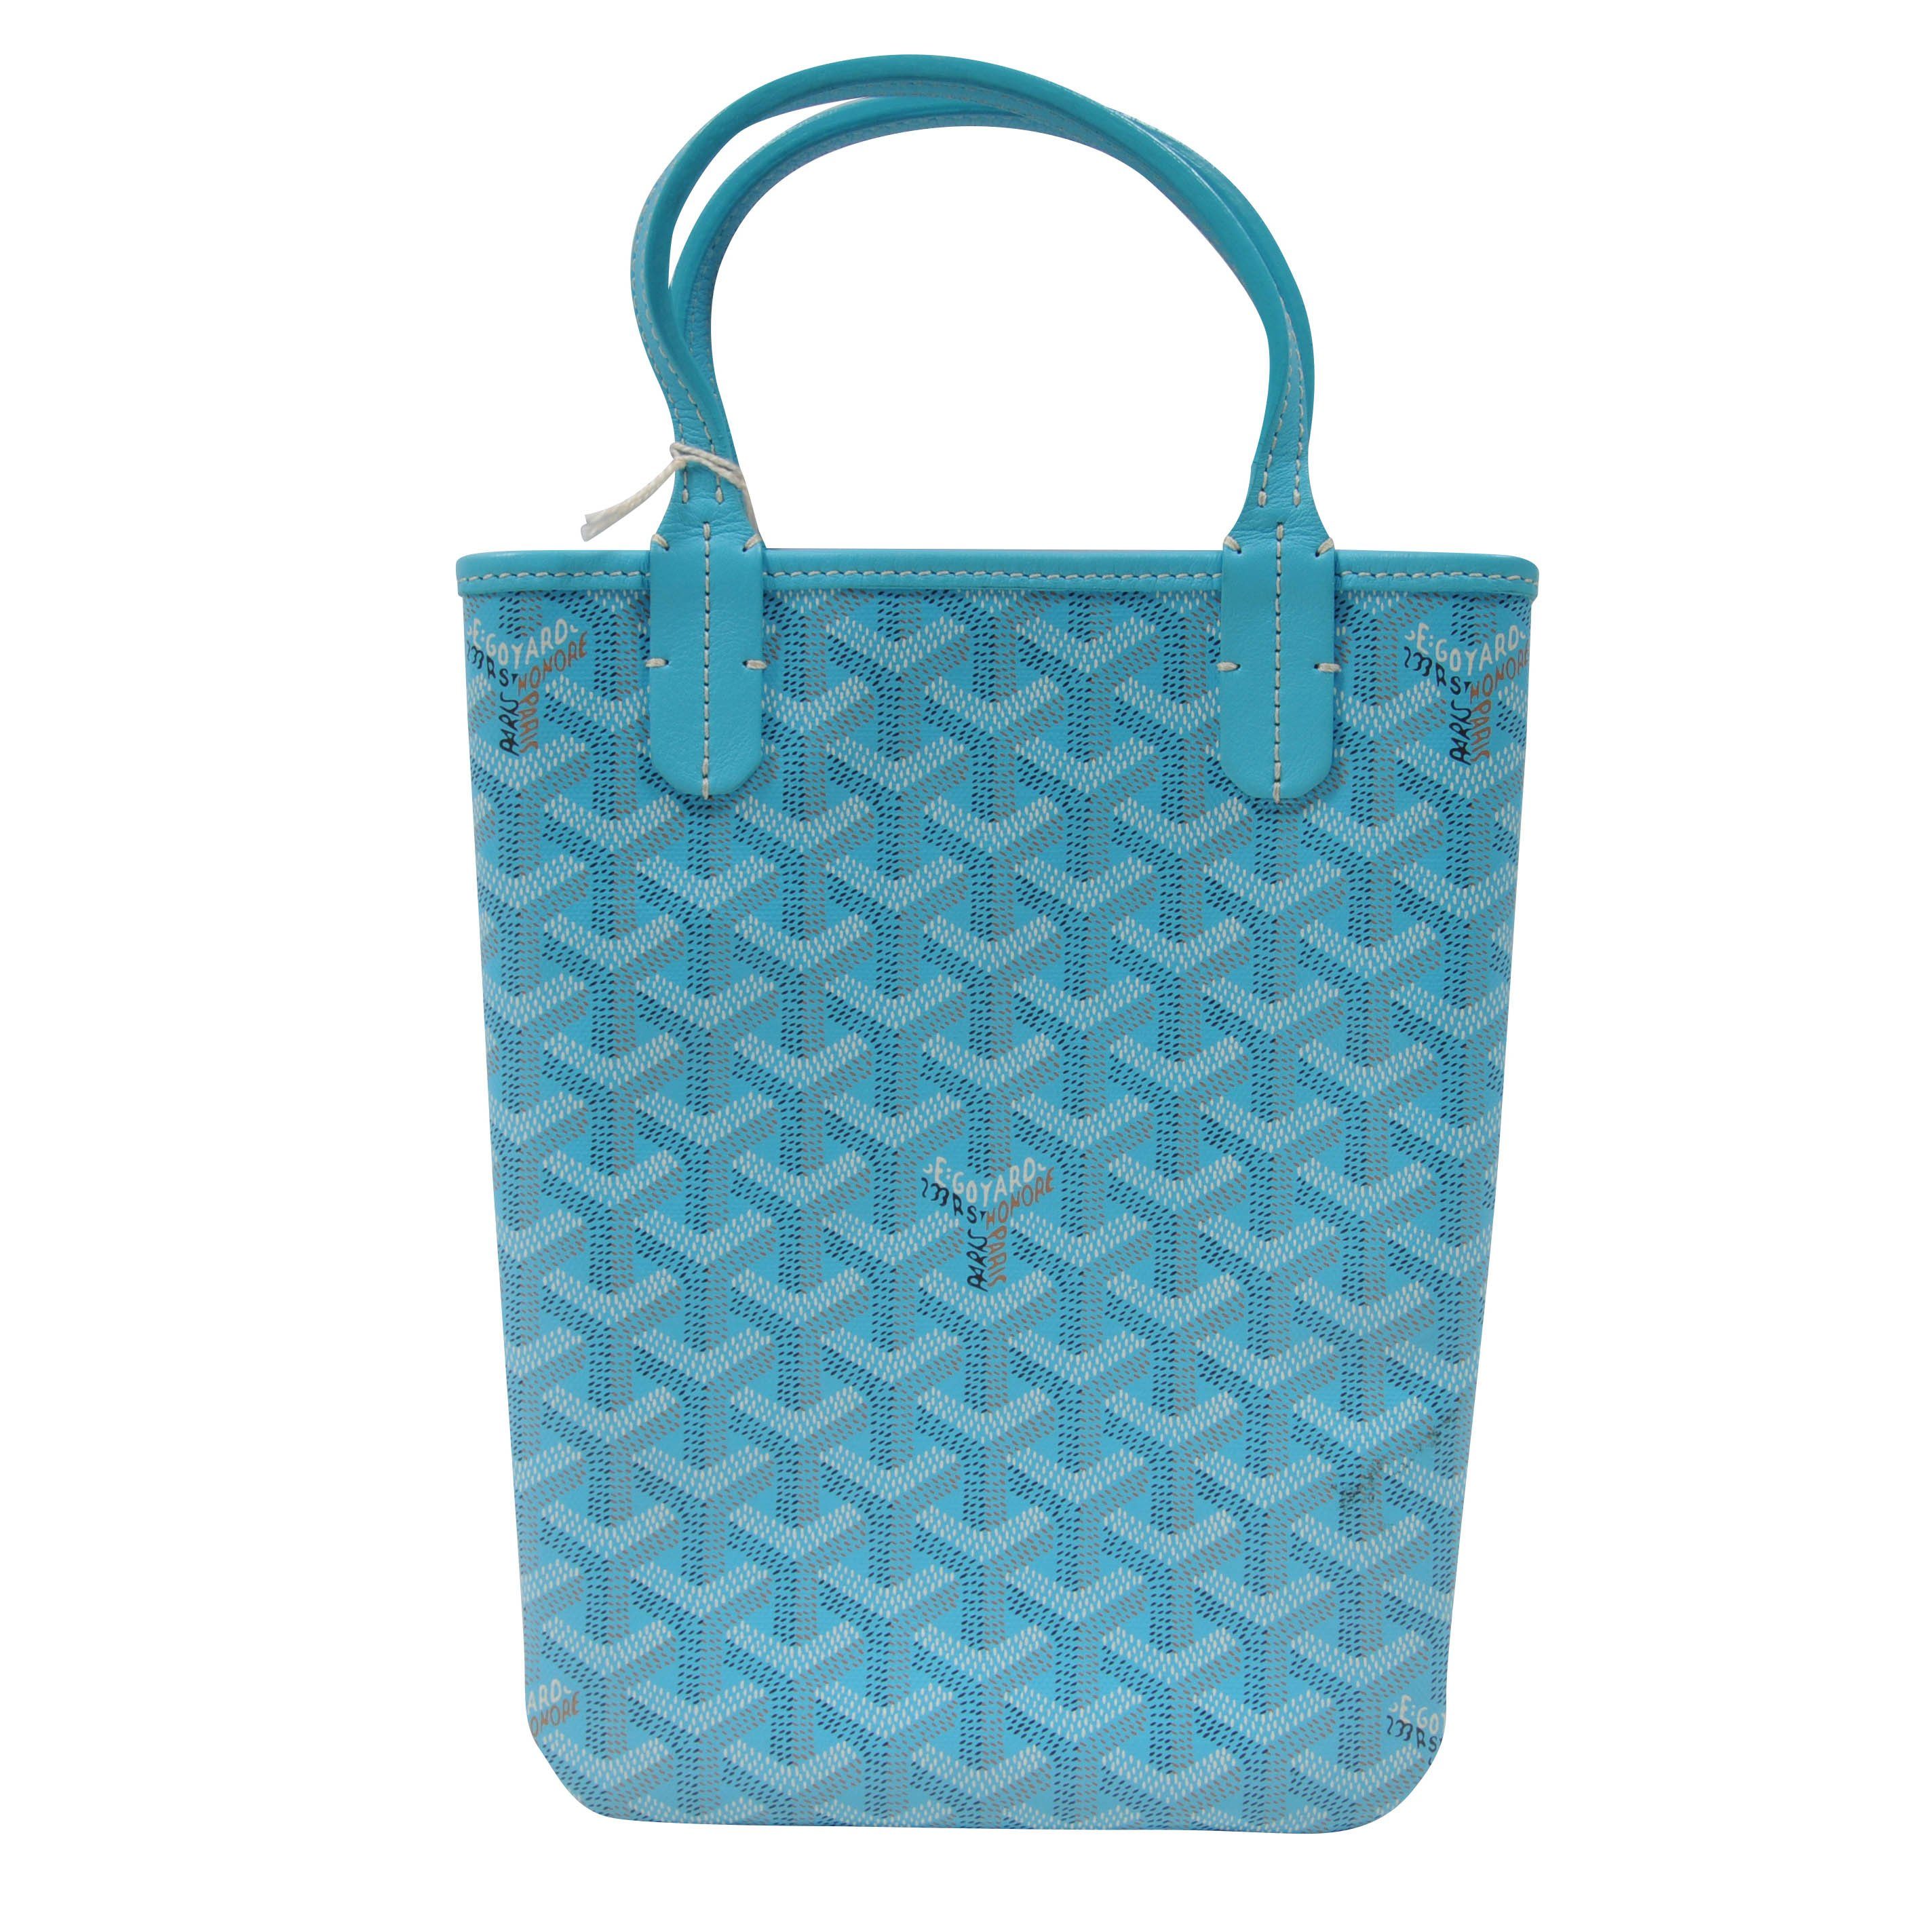 Limited Edition Turquoise Poitier Mini Tote Bag